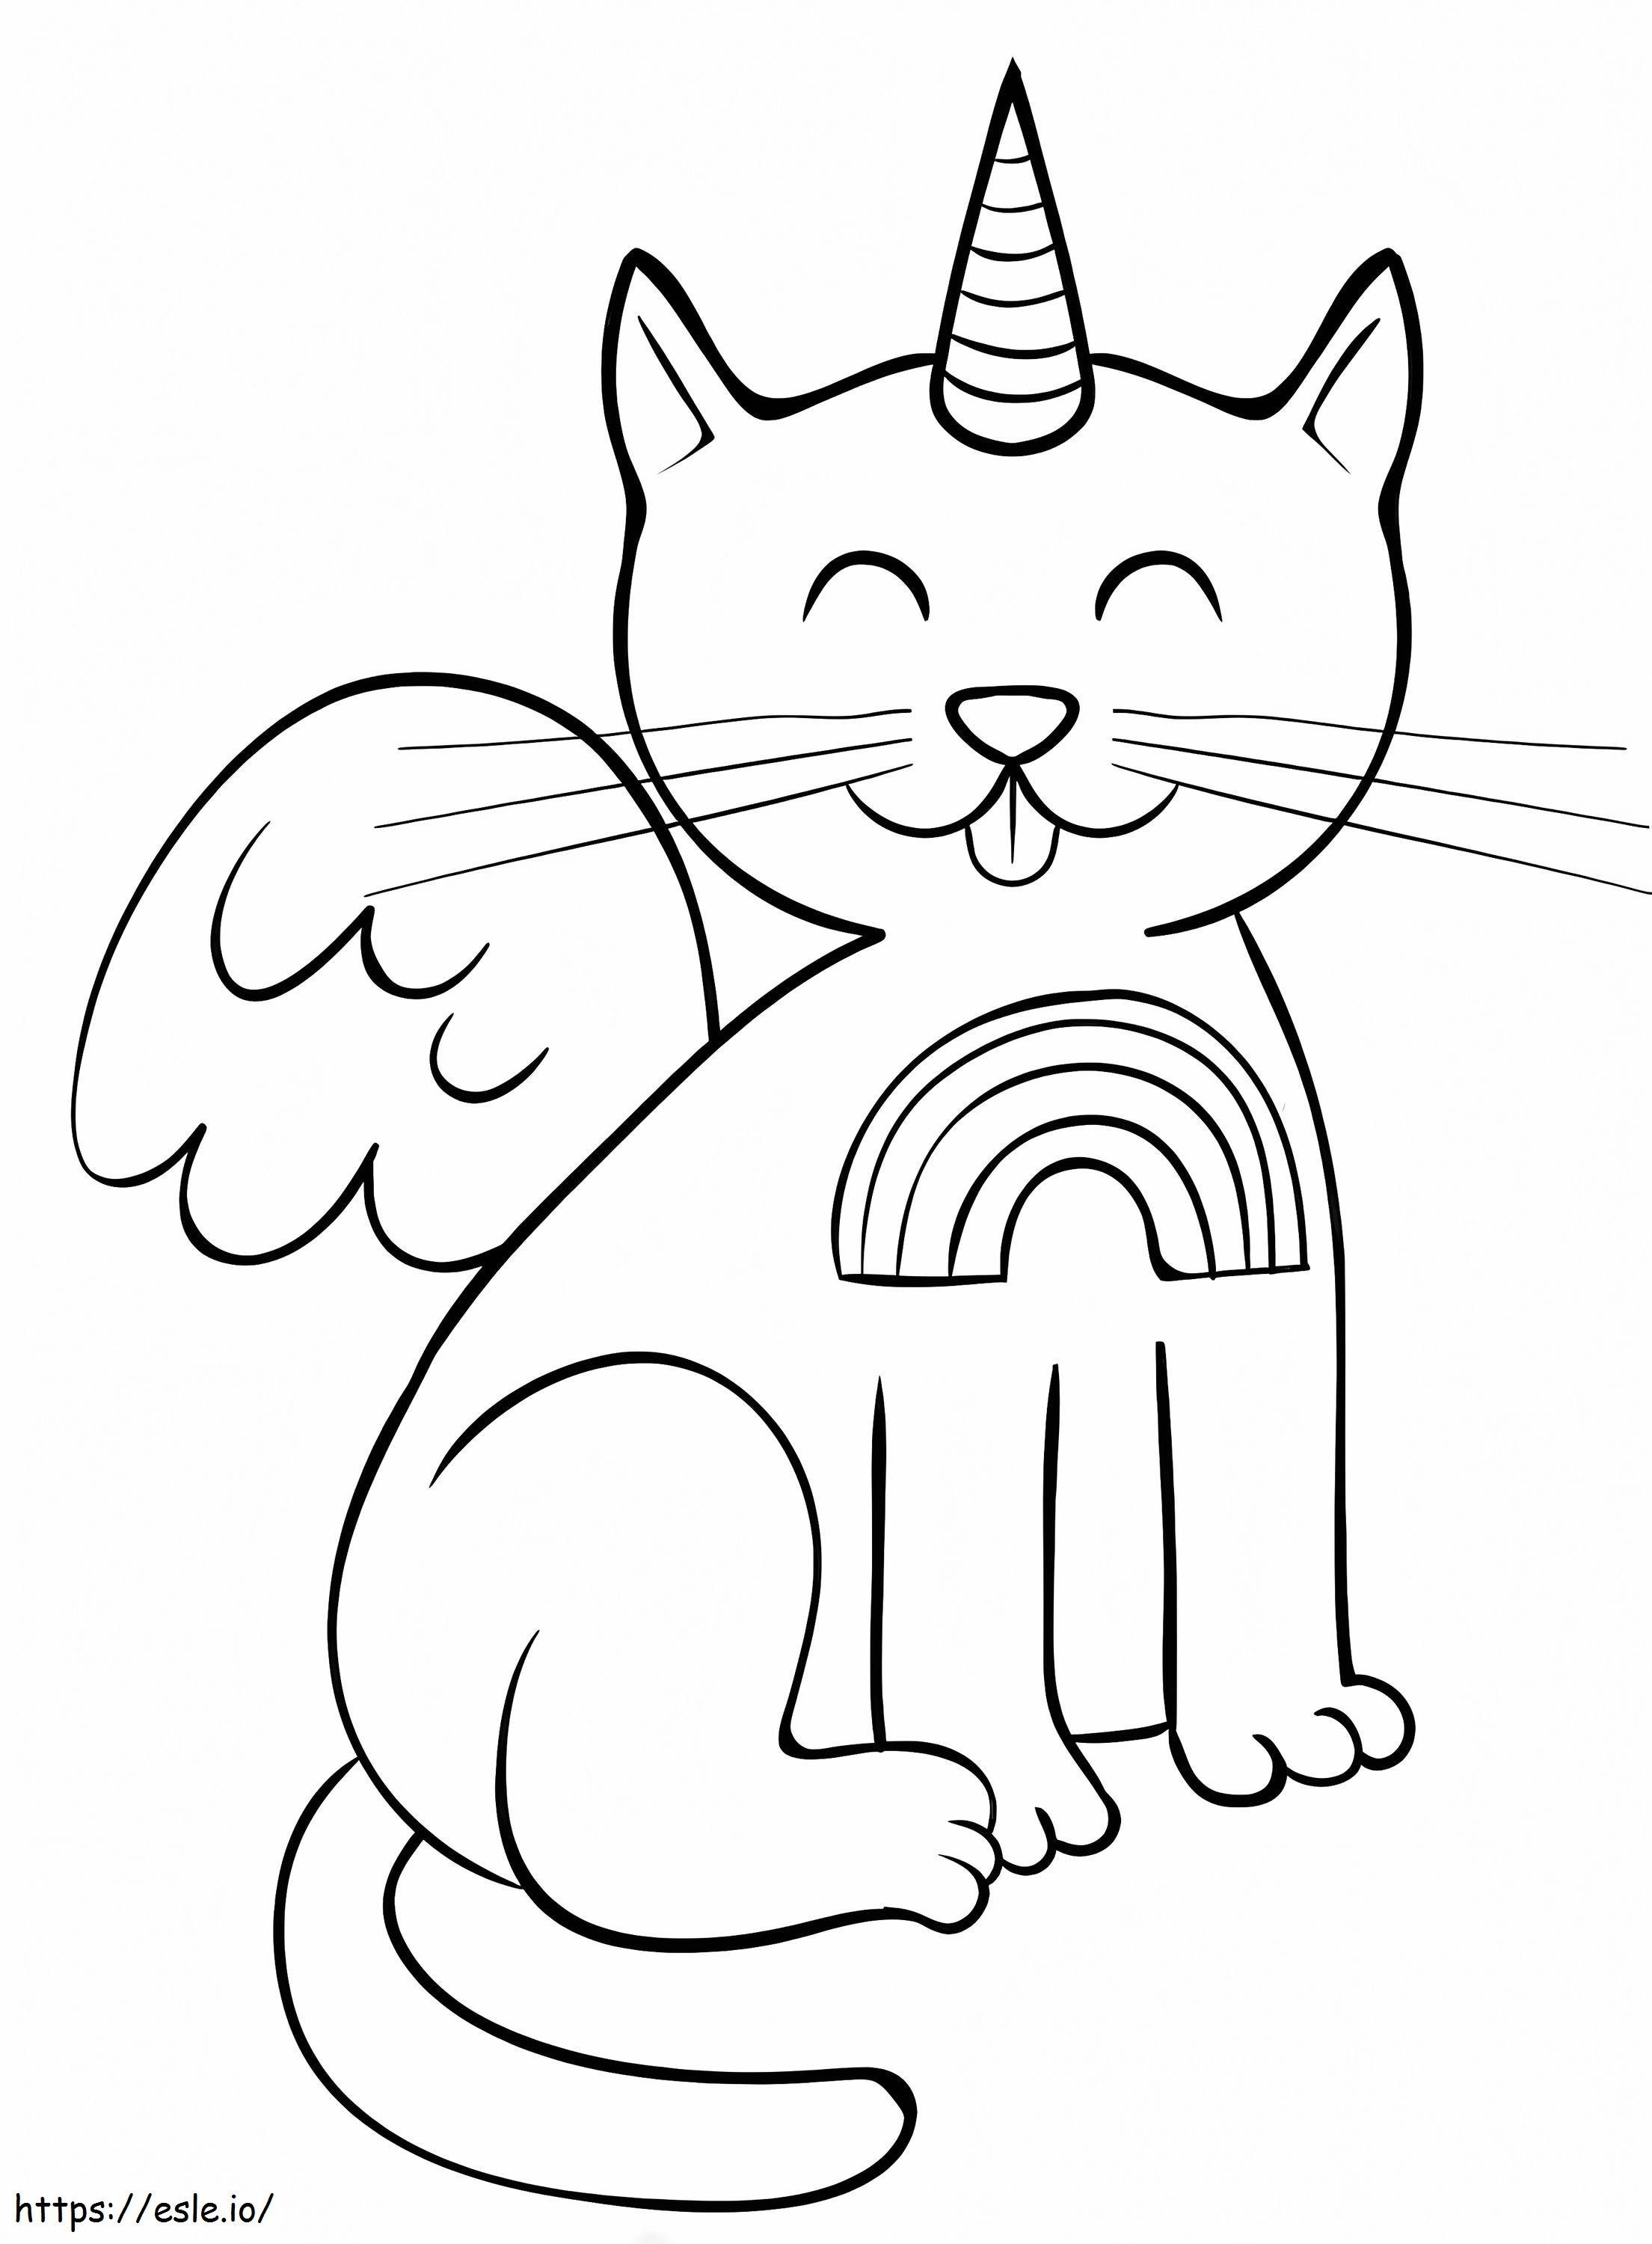 Winged Unicorn Cat coloring page